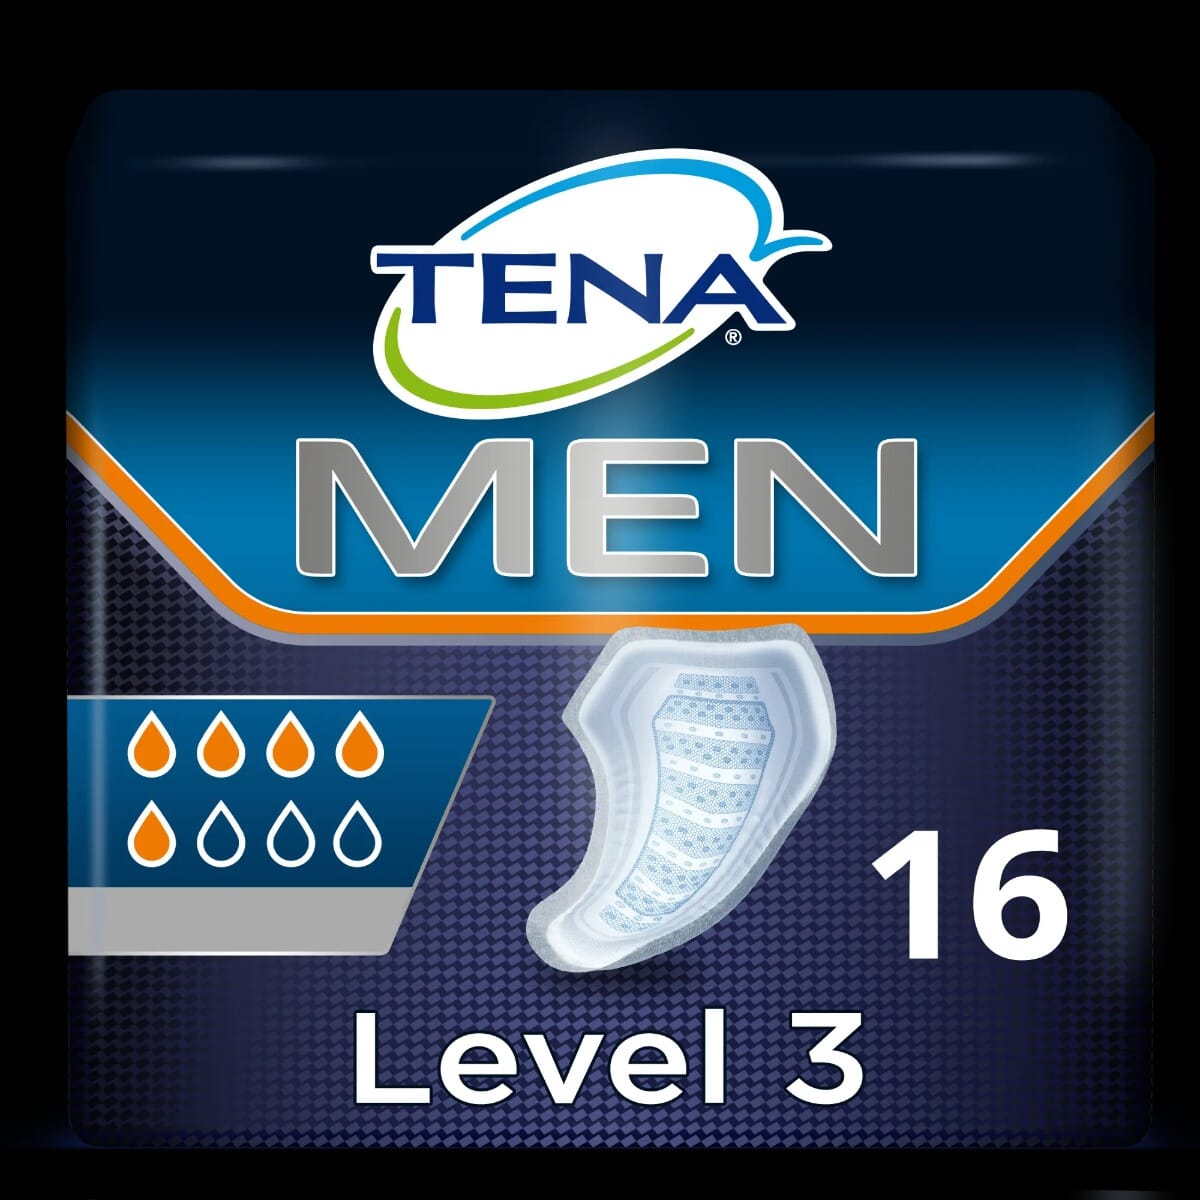 TENA Men Level 3 Incontinence Pads, Pack of 16